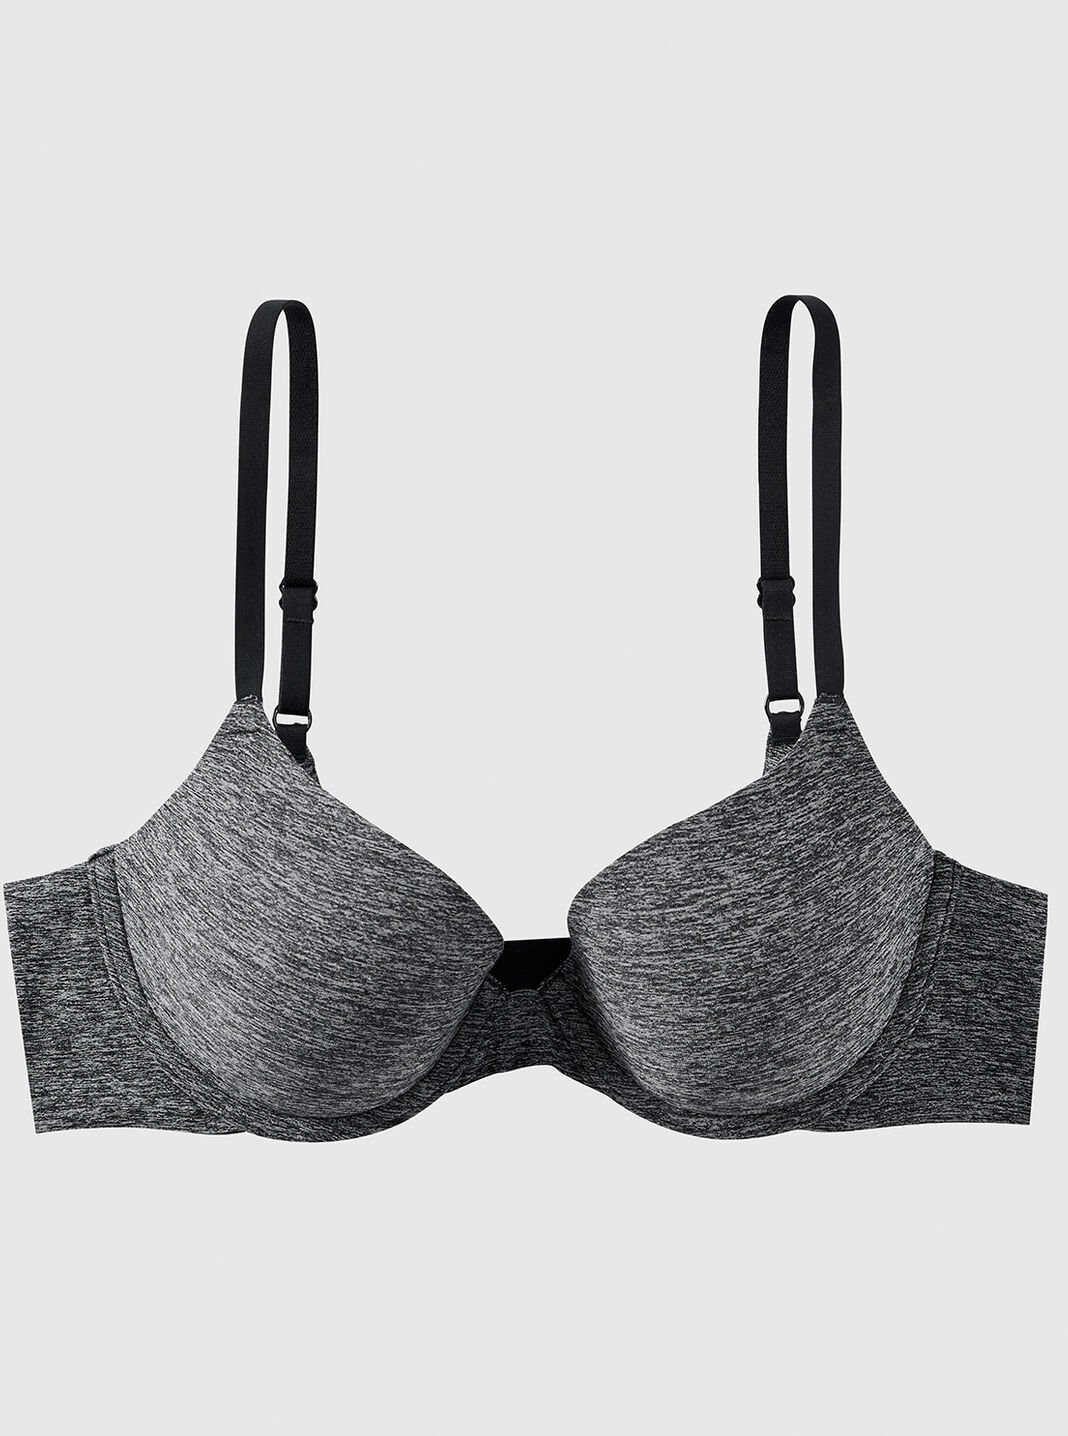 Sexy Bras for Women, Push Up, Strapless & More